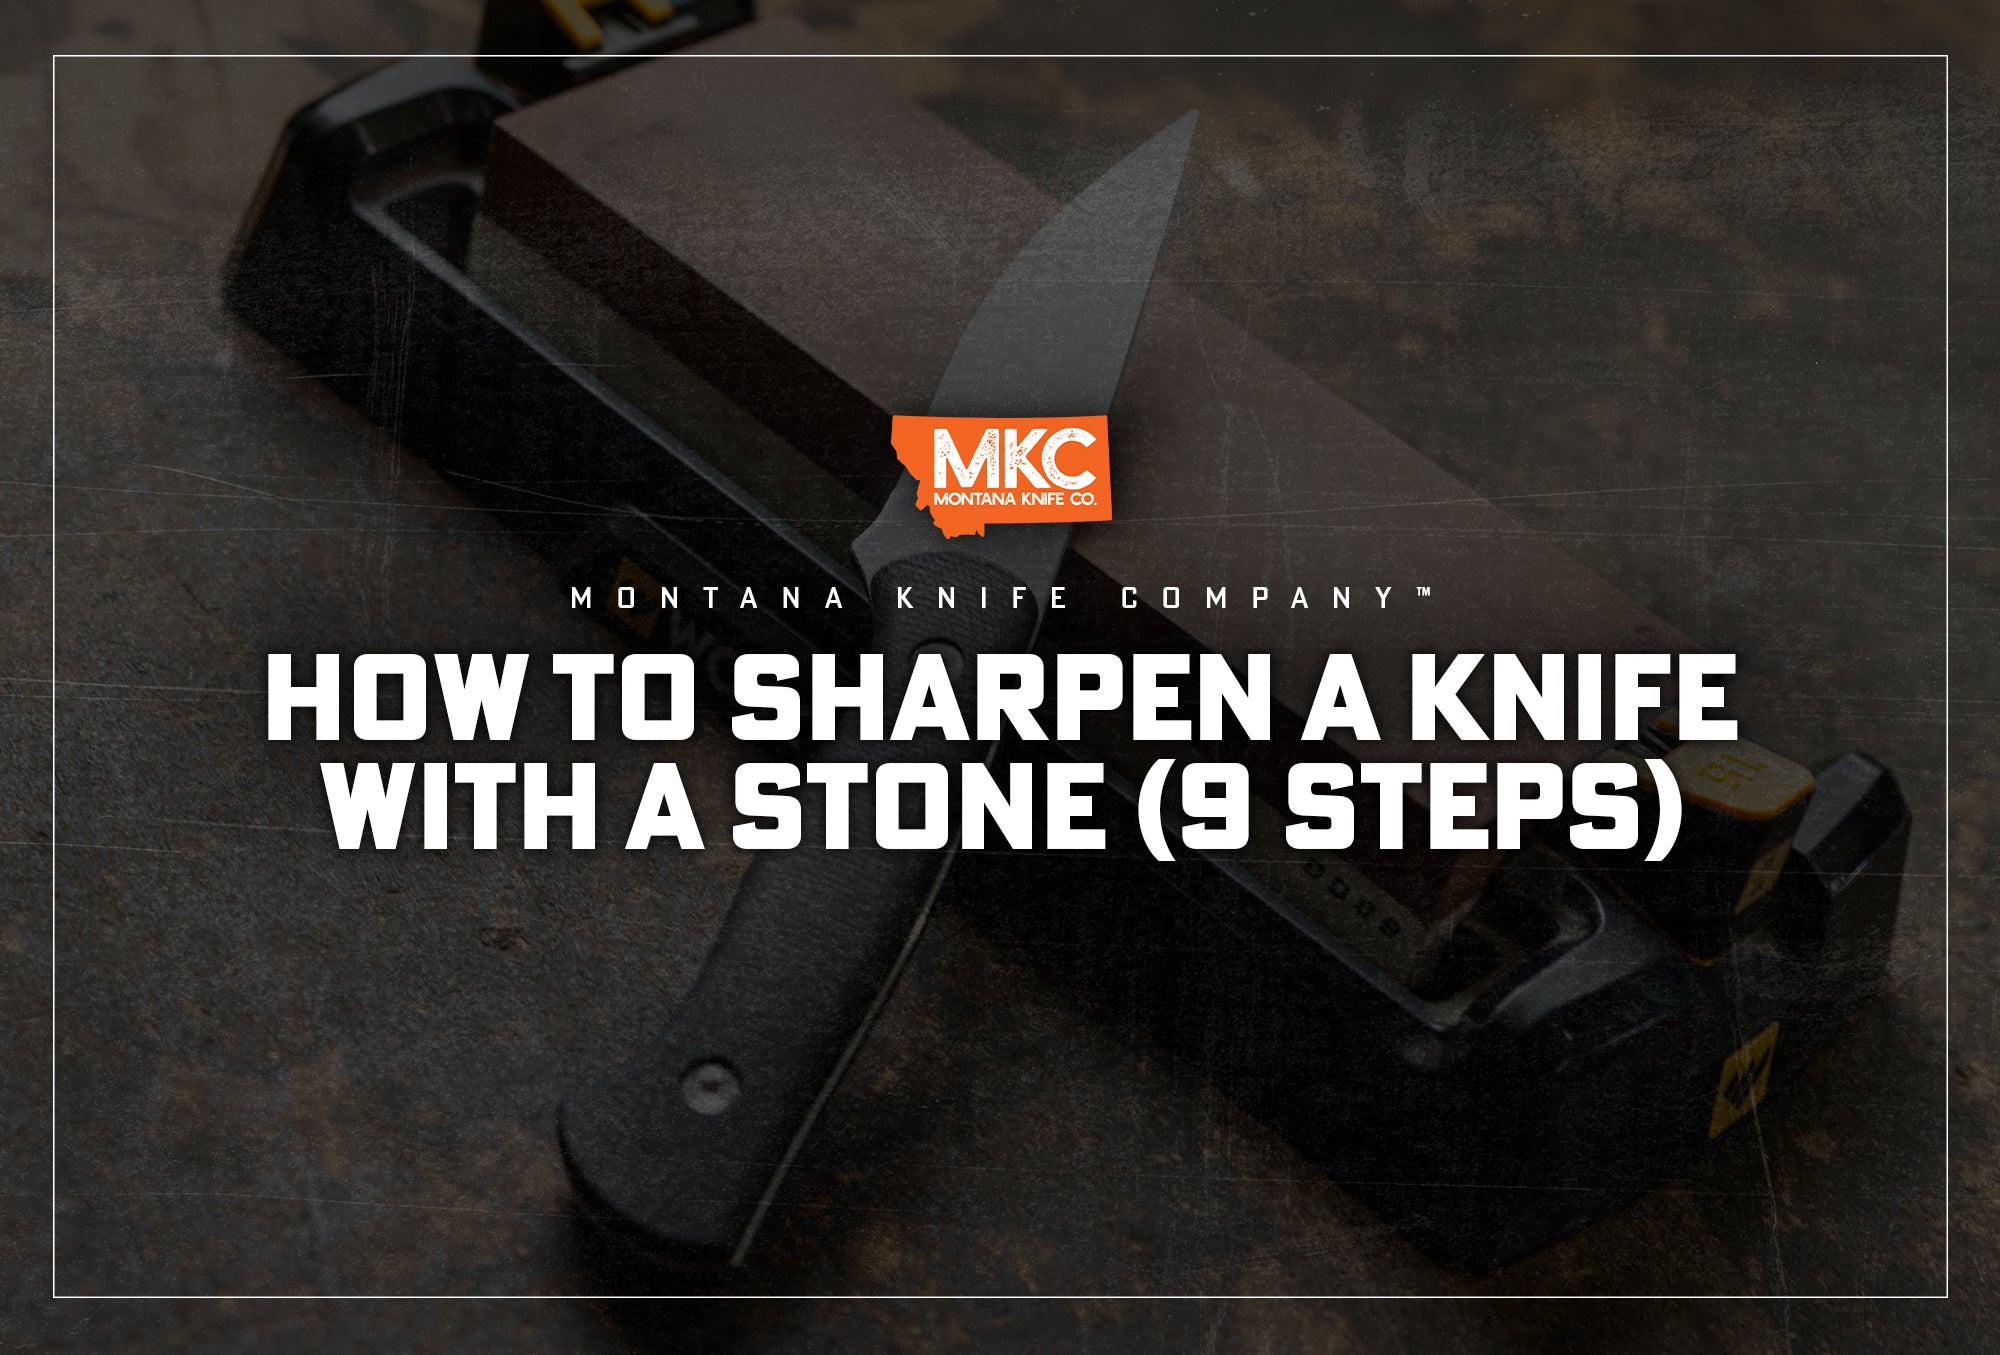 An MKC knife leans up against a knife-sharpening stone.